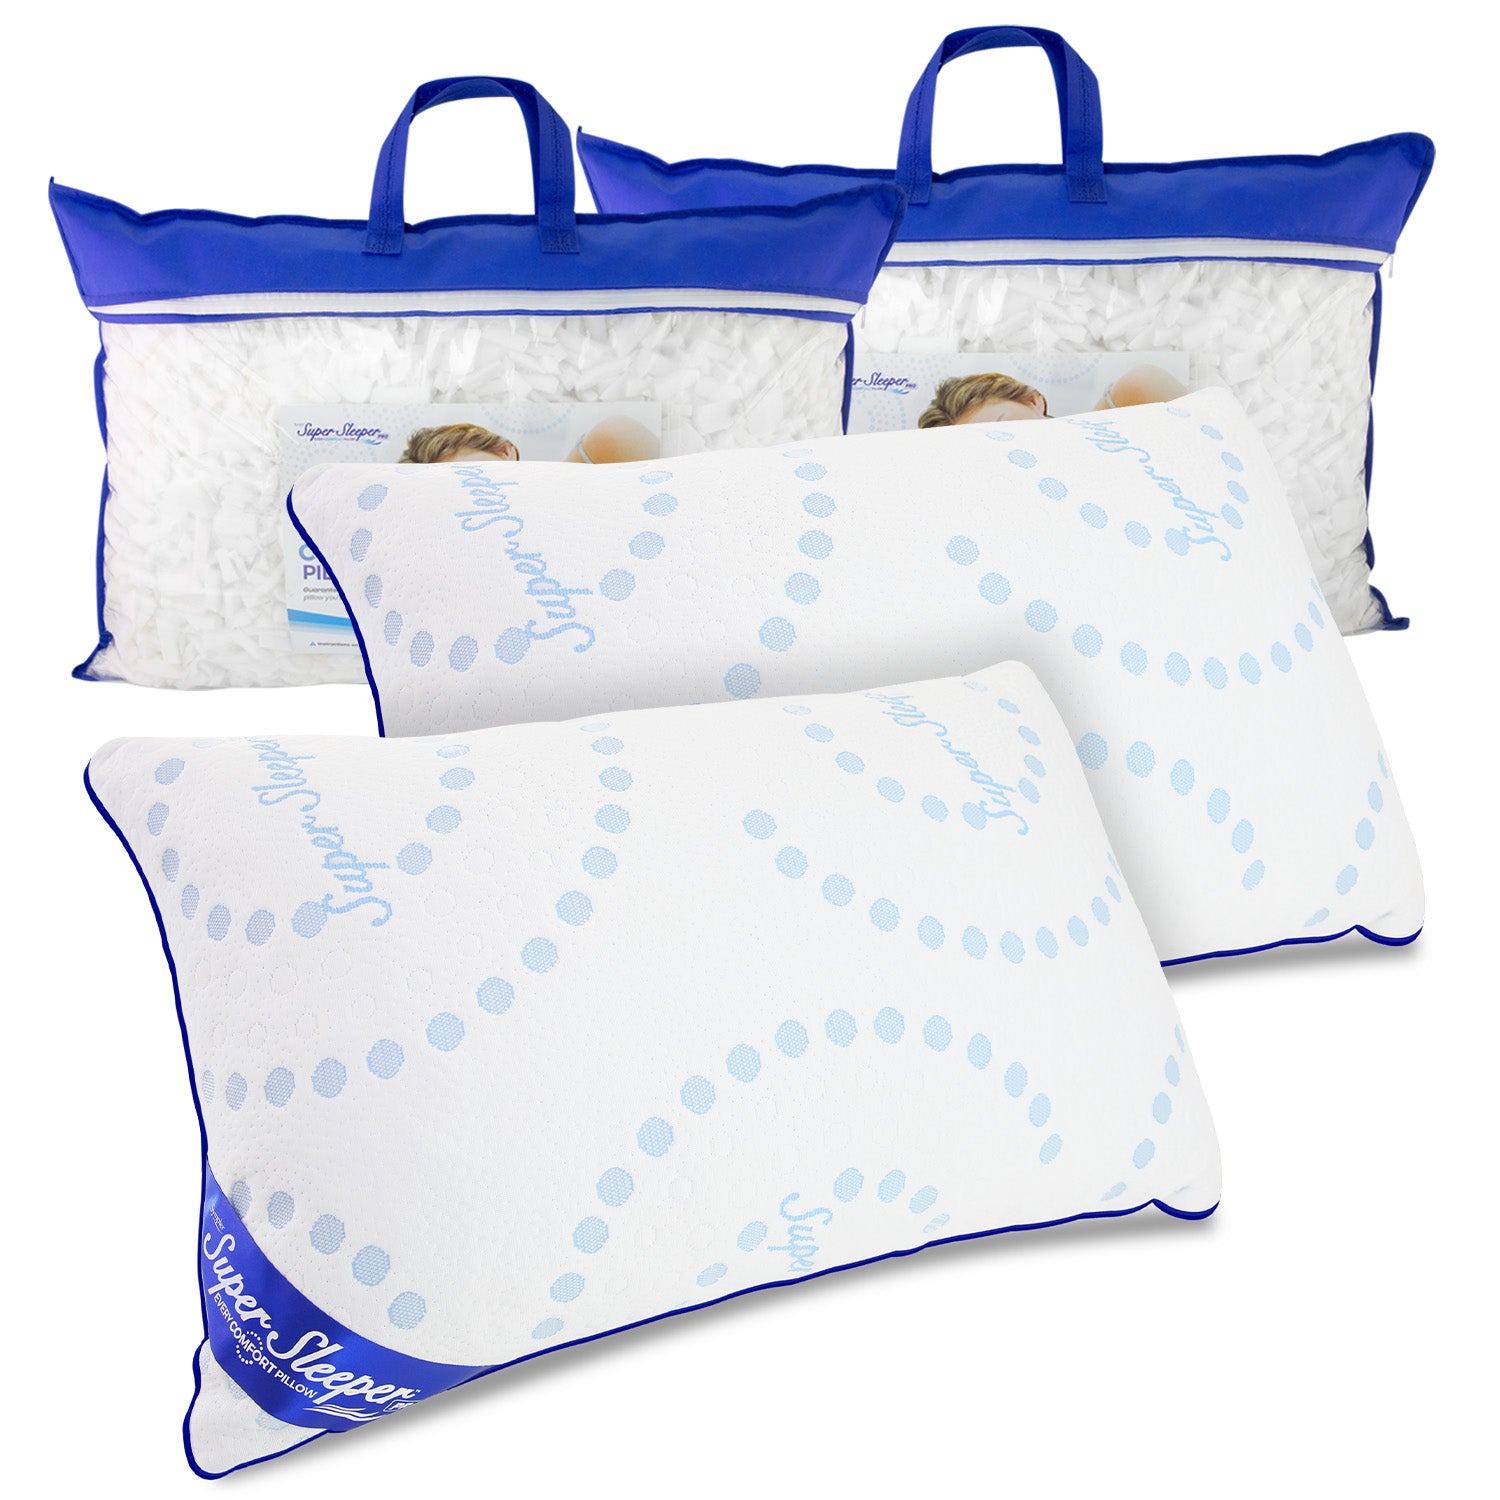 Every Comfort Pillow - Buy 1 Get 1 FREE TV Offer! PLUS 2 Storage